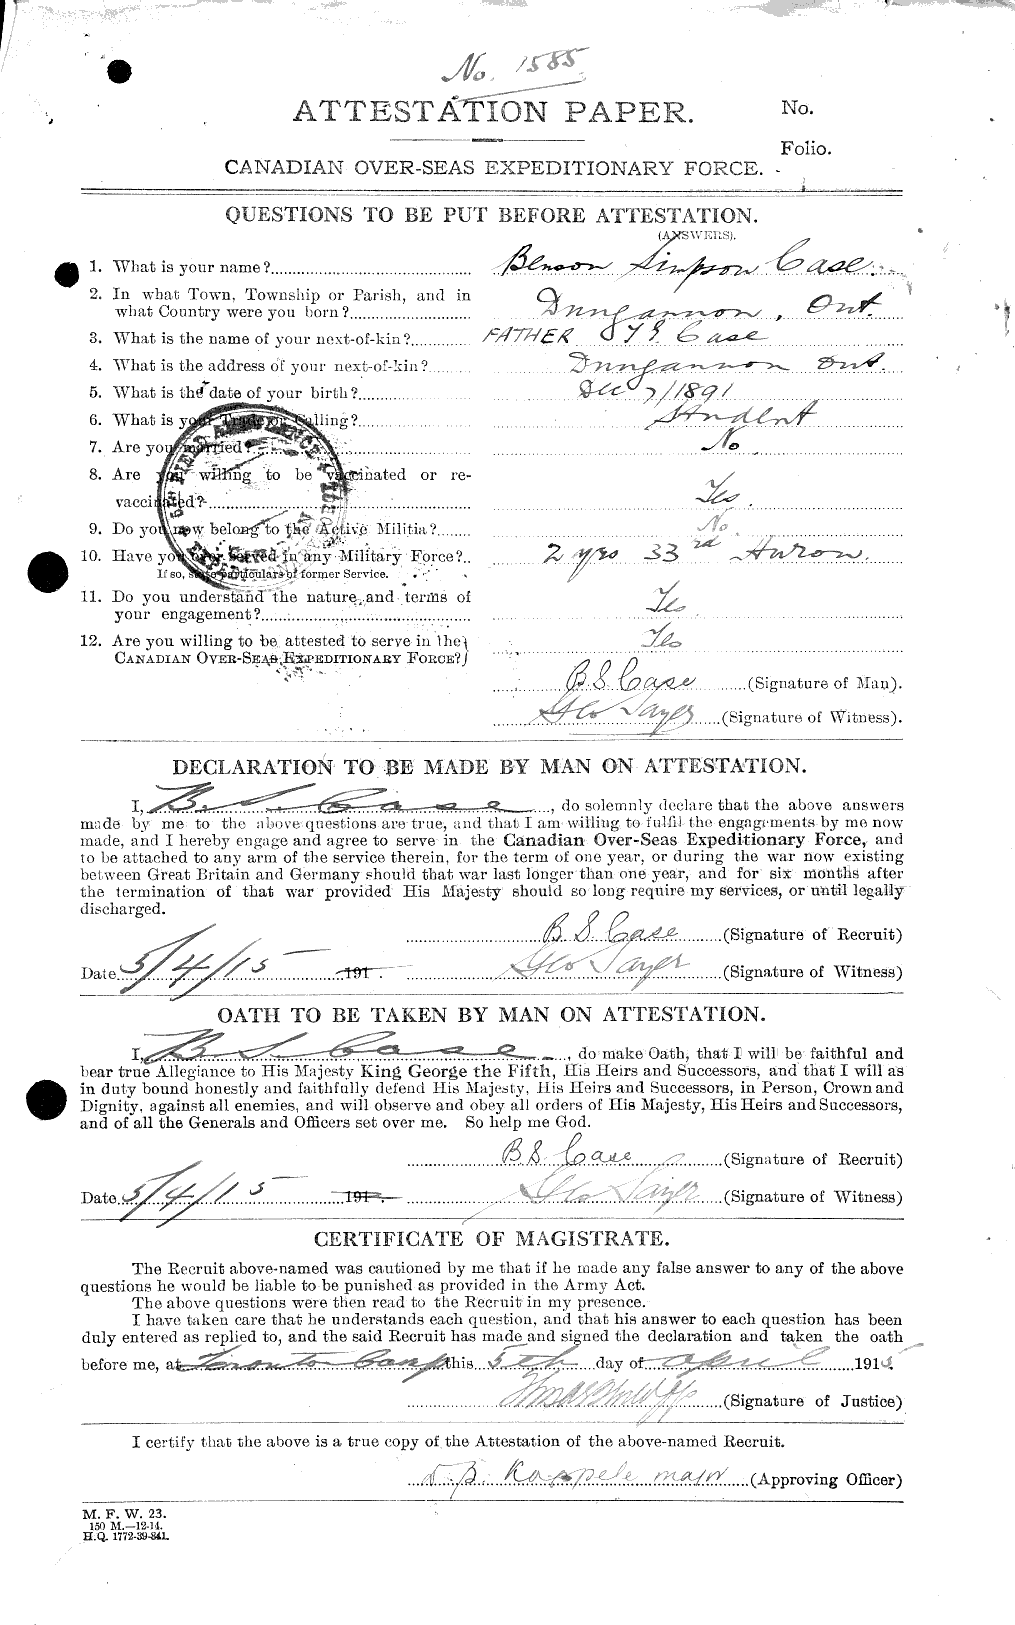 Personnel Records of the First World War - CEF 012685a